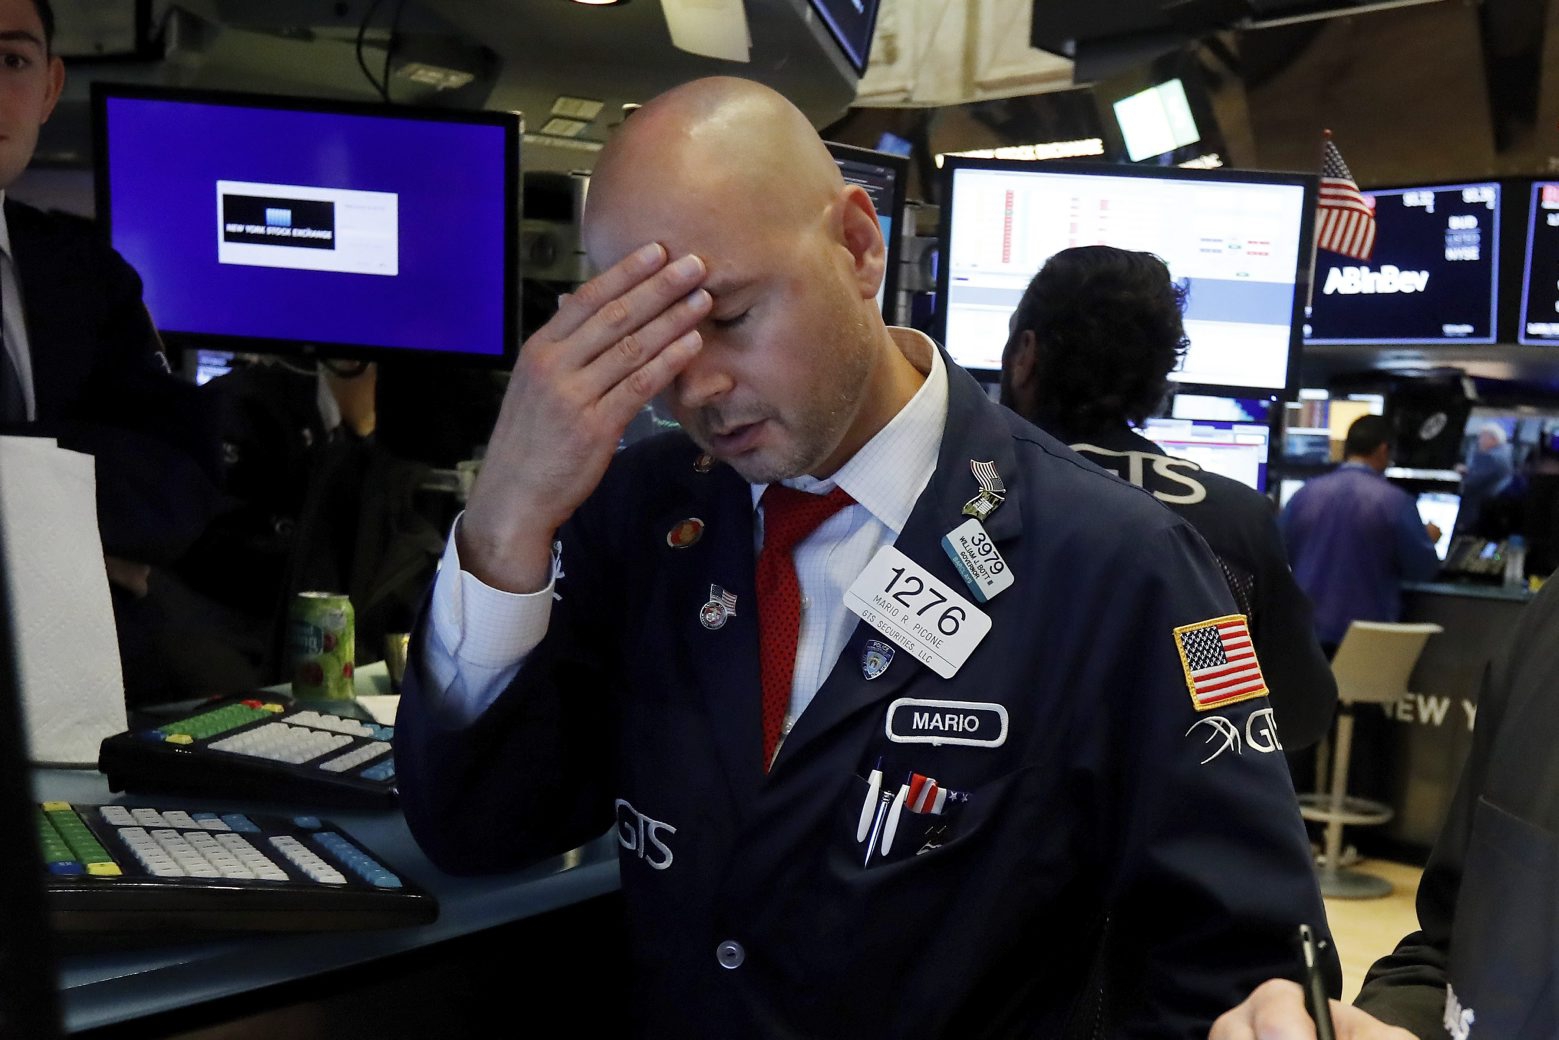 Specialist Mario Picone works on the floor of the New York Stock Exchange, Wednesday, Aug. 14, 2019. The Dow Jones Industrial Average sank 800 points after the bond market flashed a warning sign about a possible recession for the first time since 2007. (AP Photo/Richard Drew)
Mario Picone Financial Markets Wall Street